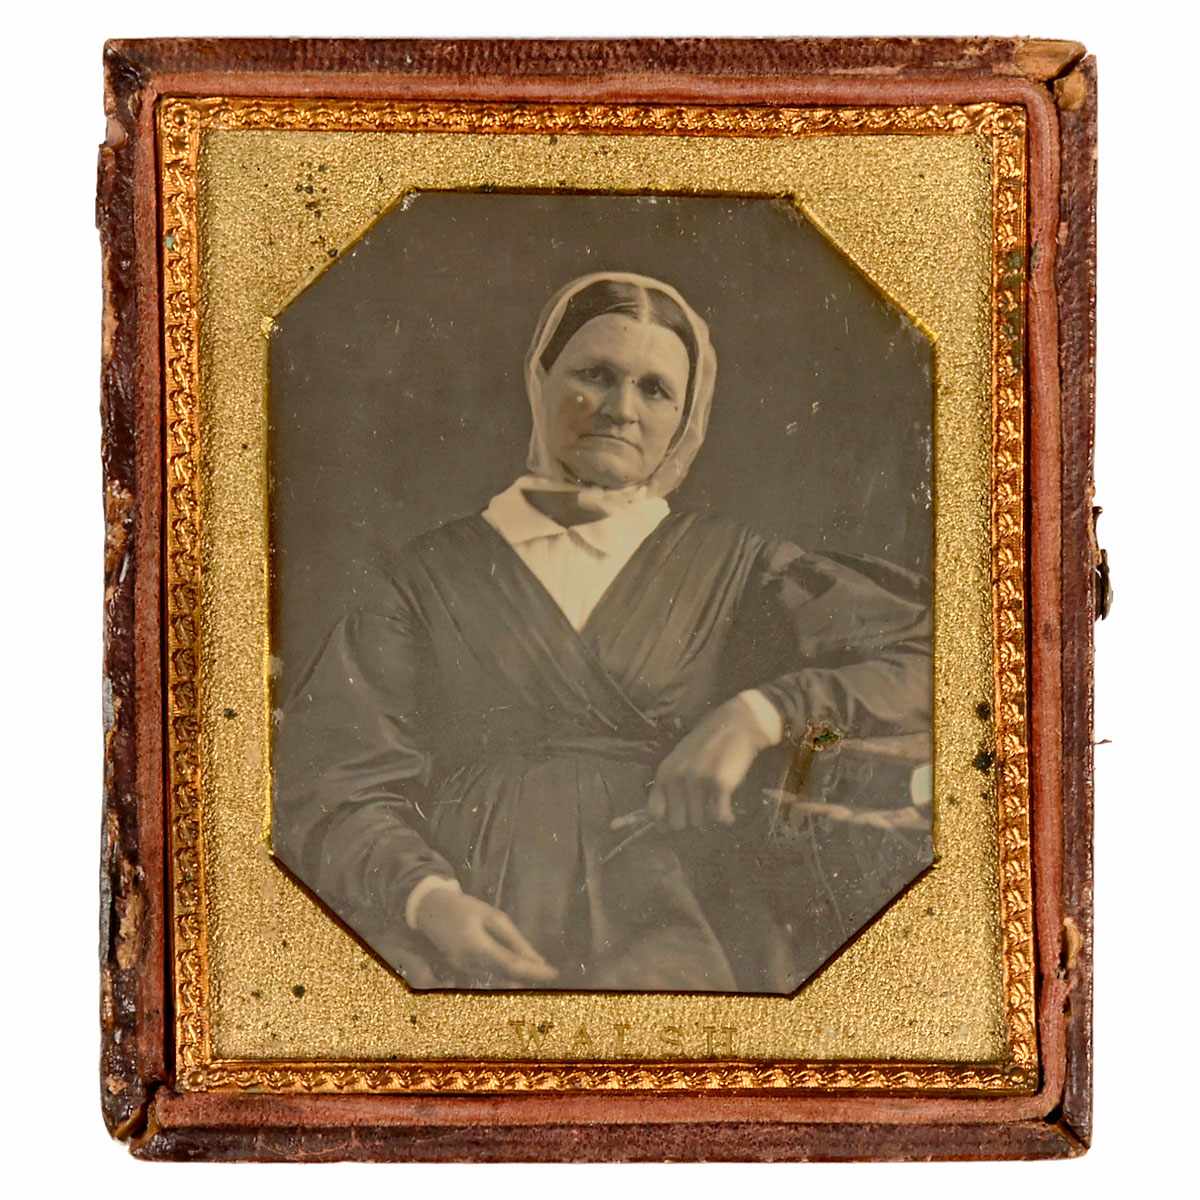 Daguerreotype (Portrait of a Lady), c. 1845-50 Anonymous. 1/6 plate, slightly hand-tinted, brass